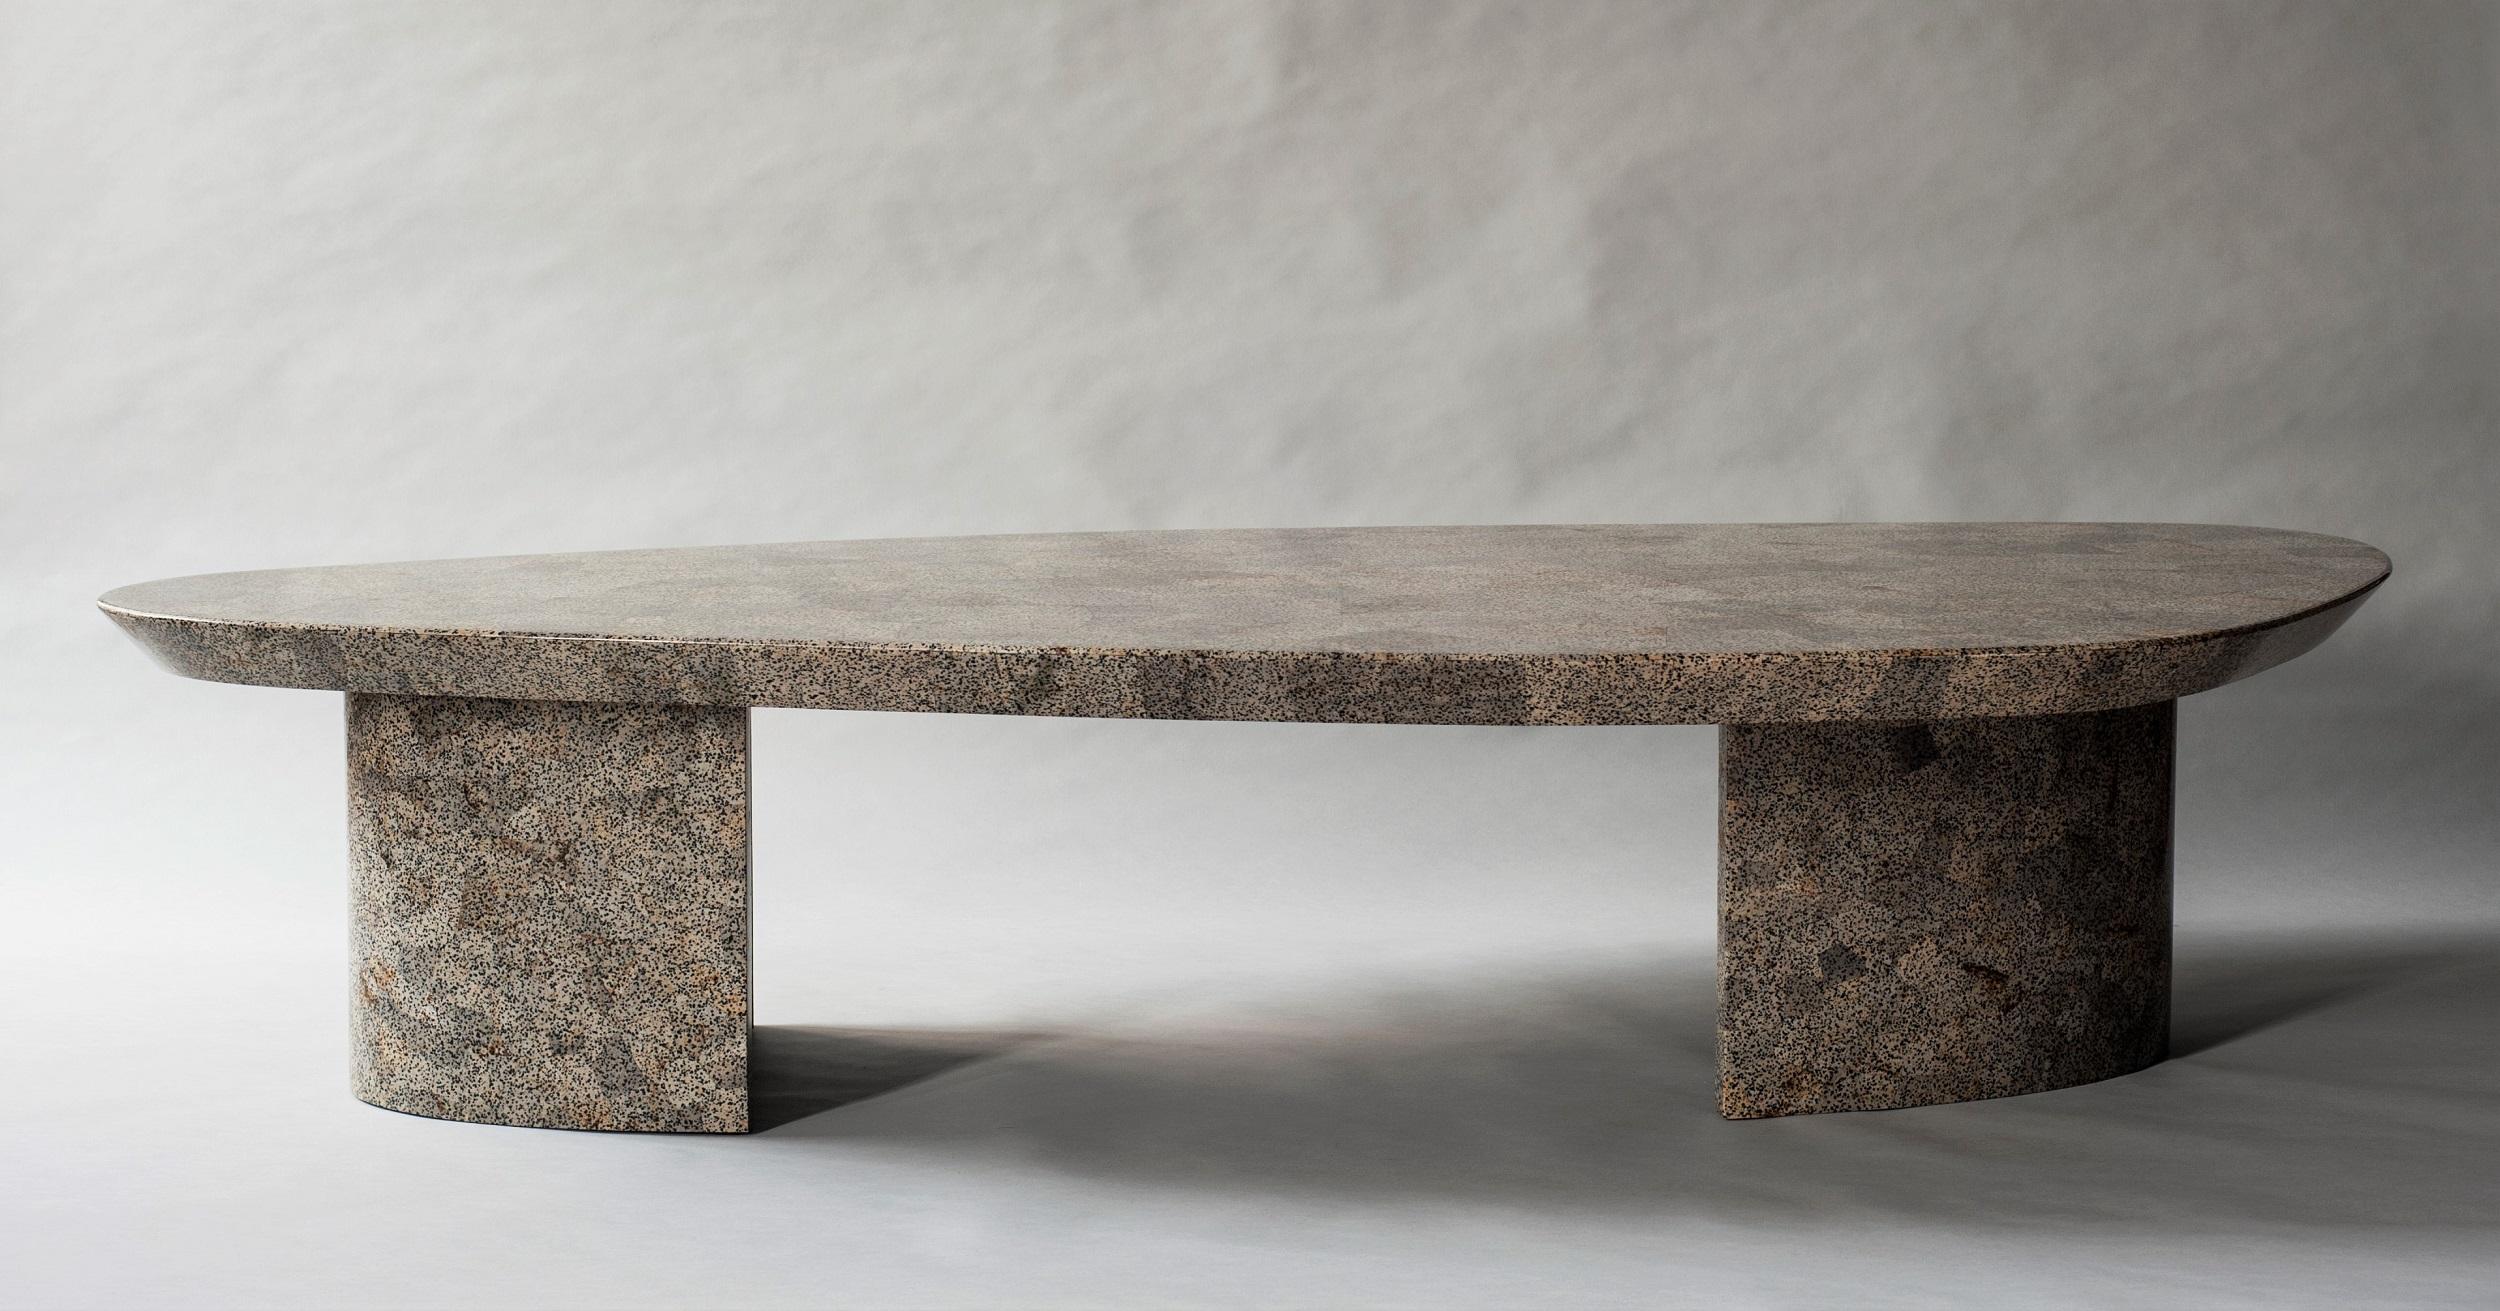 Ledge coffee table by DeMuro Das 
Dimensions: W 193 x D 96 x H 39.4 cm
Materials: Dalmatain Jasper, polished (random)

Dimensions and finishes can be customized.

DeMuro Das is an international design firm and the aesthetic and cultural